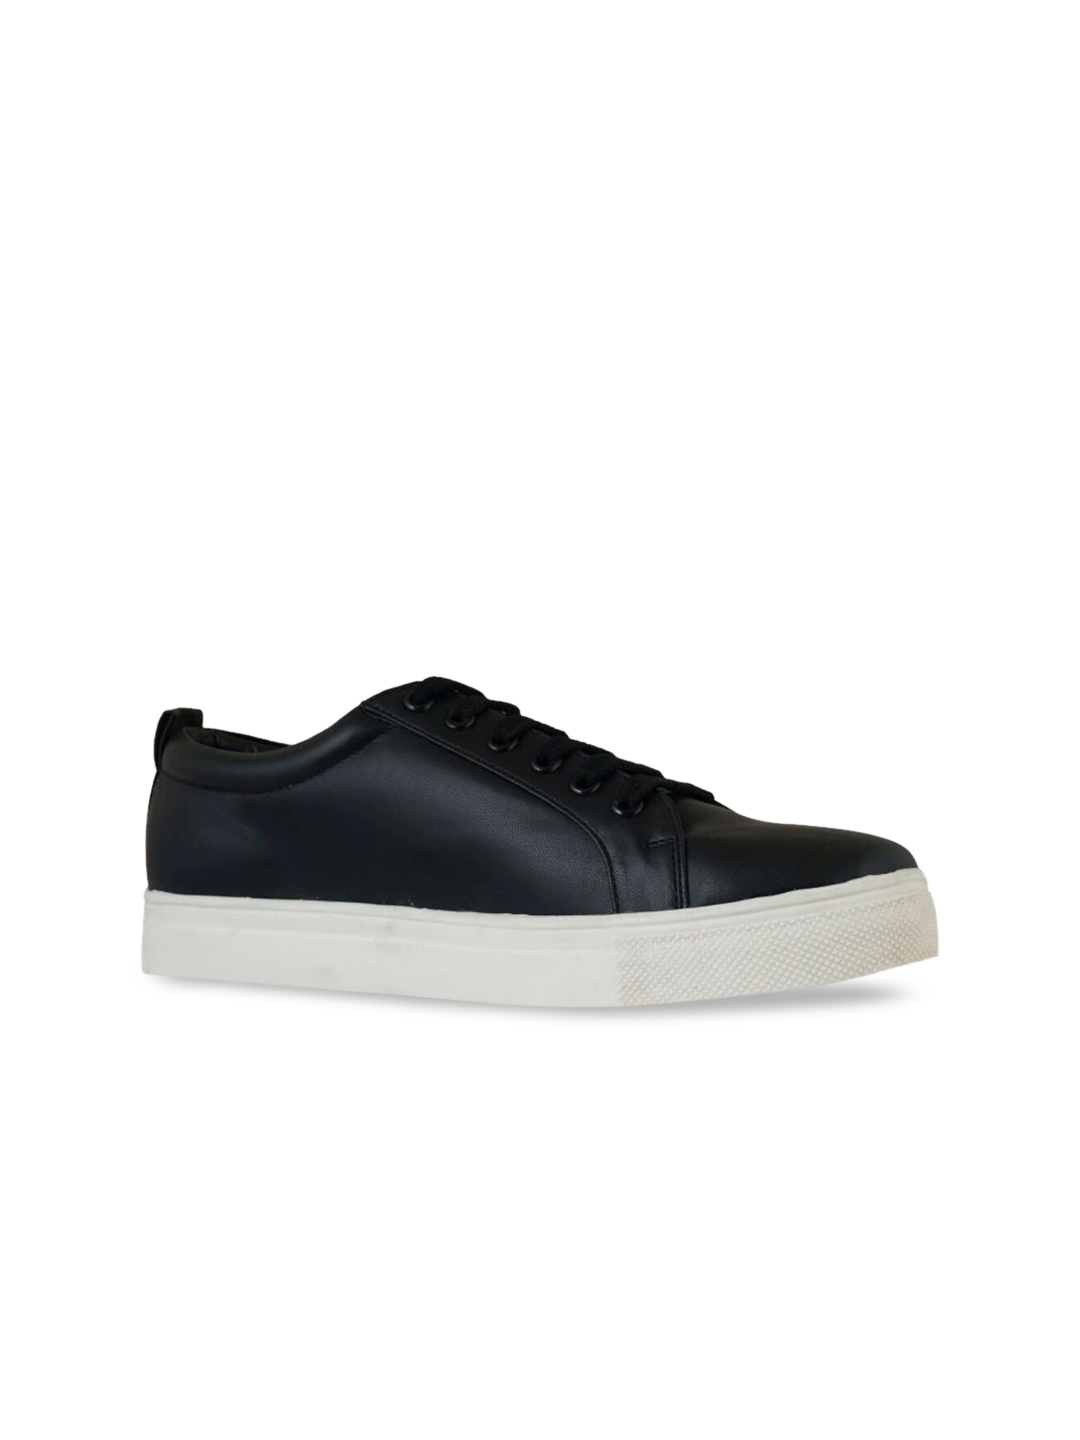 Buy Kenneth Cole Women Black Leather Sneakers - Casual Shoes for Women ...